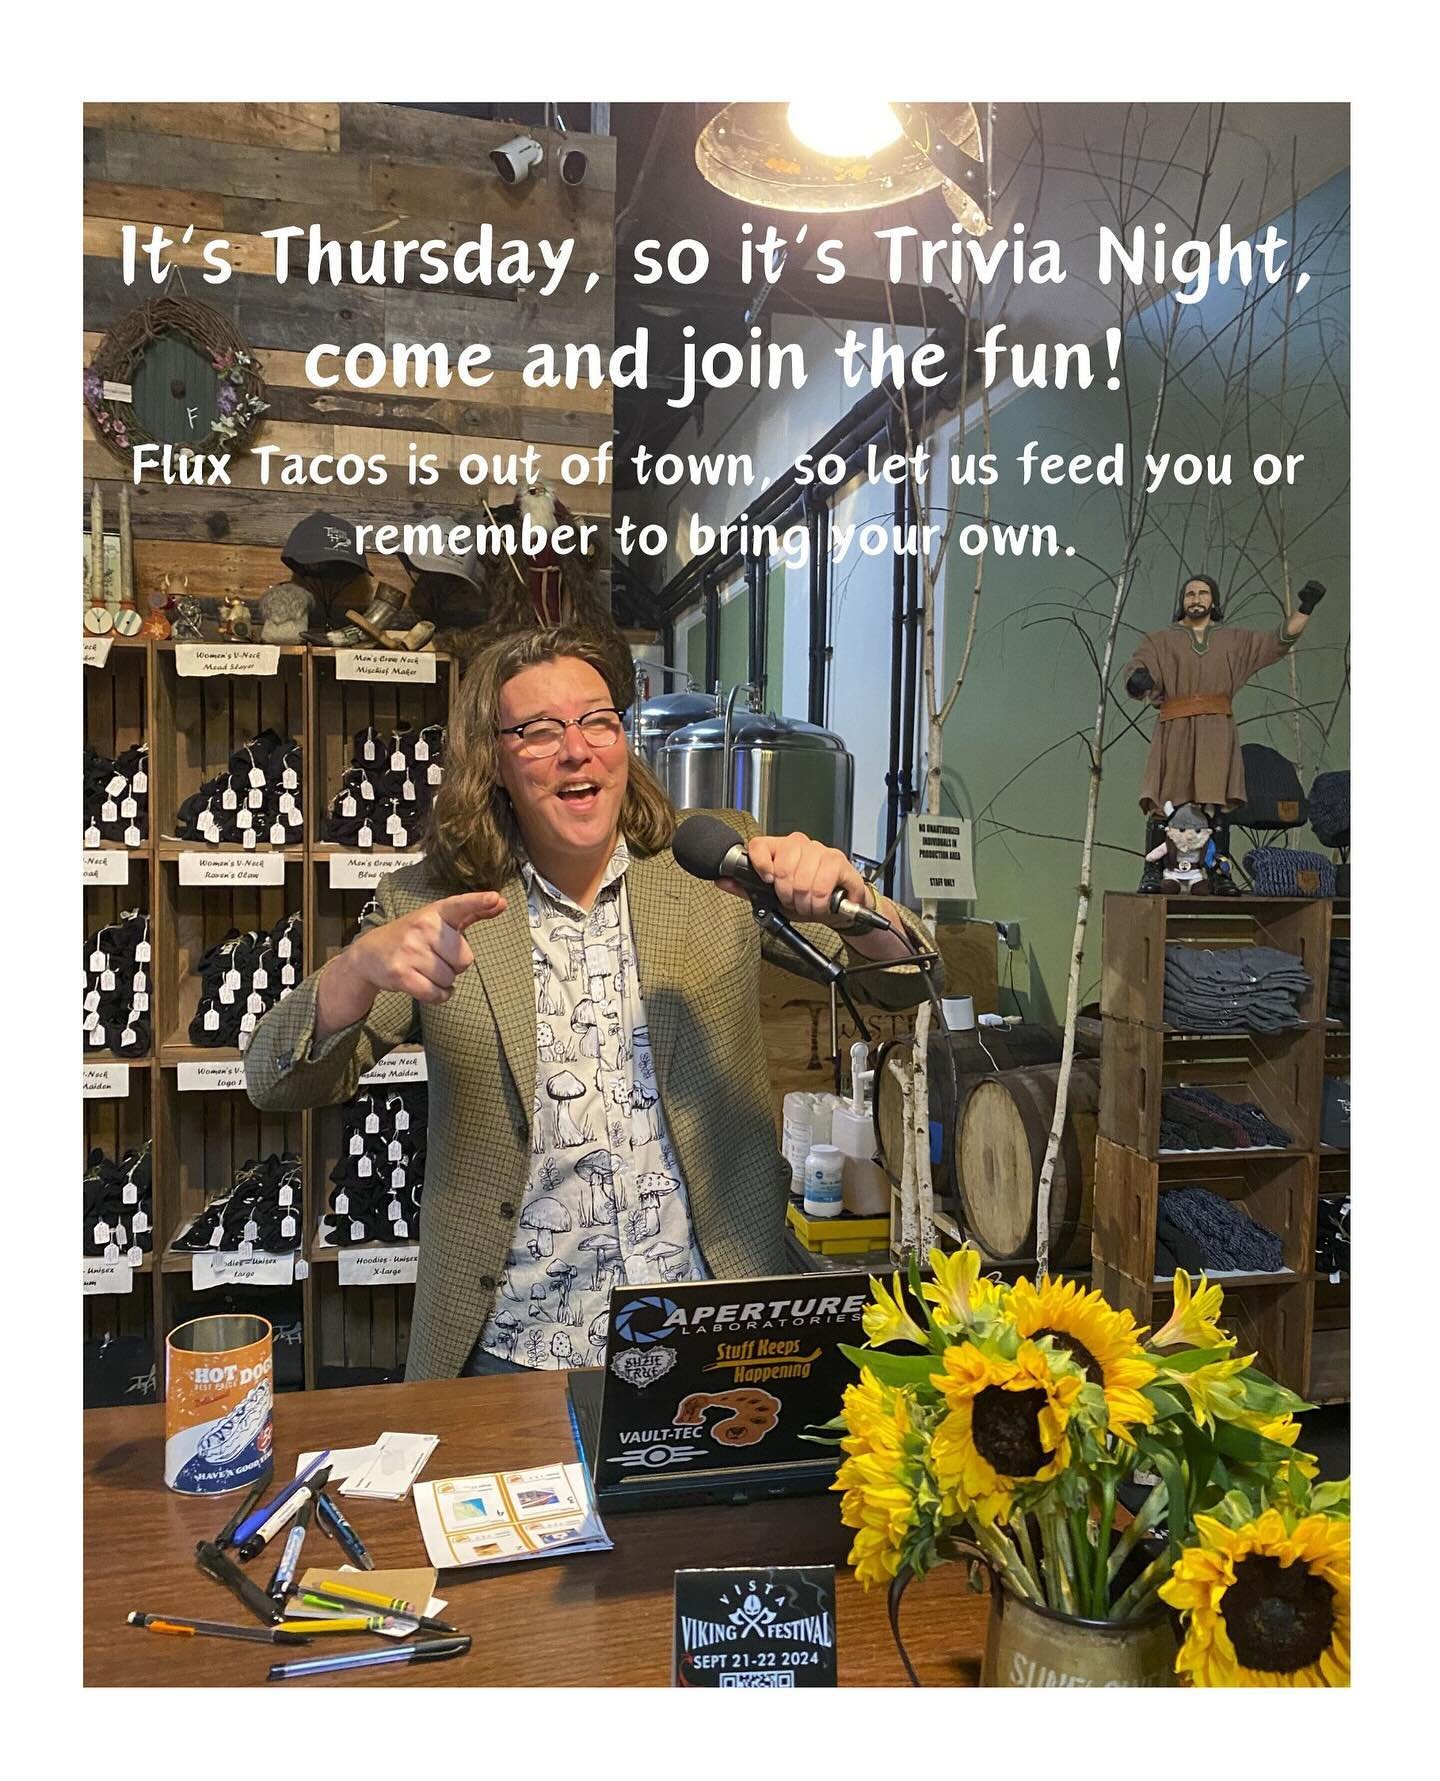 Happy Thursday all that's right, it's Thursday and that means it's TRIVIA NIGHT at Twisted Horn hosted by Michael Ambriz and @gamenightlive Unfortunately, @fluxtacos will be out of town so let us feed you or remember to bring something for your self.